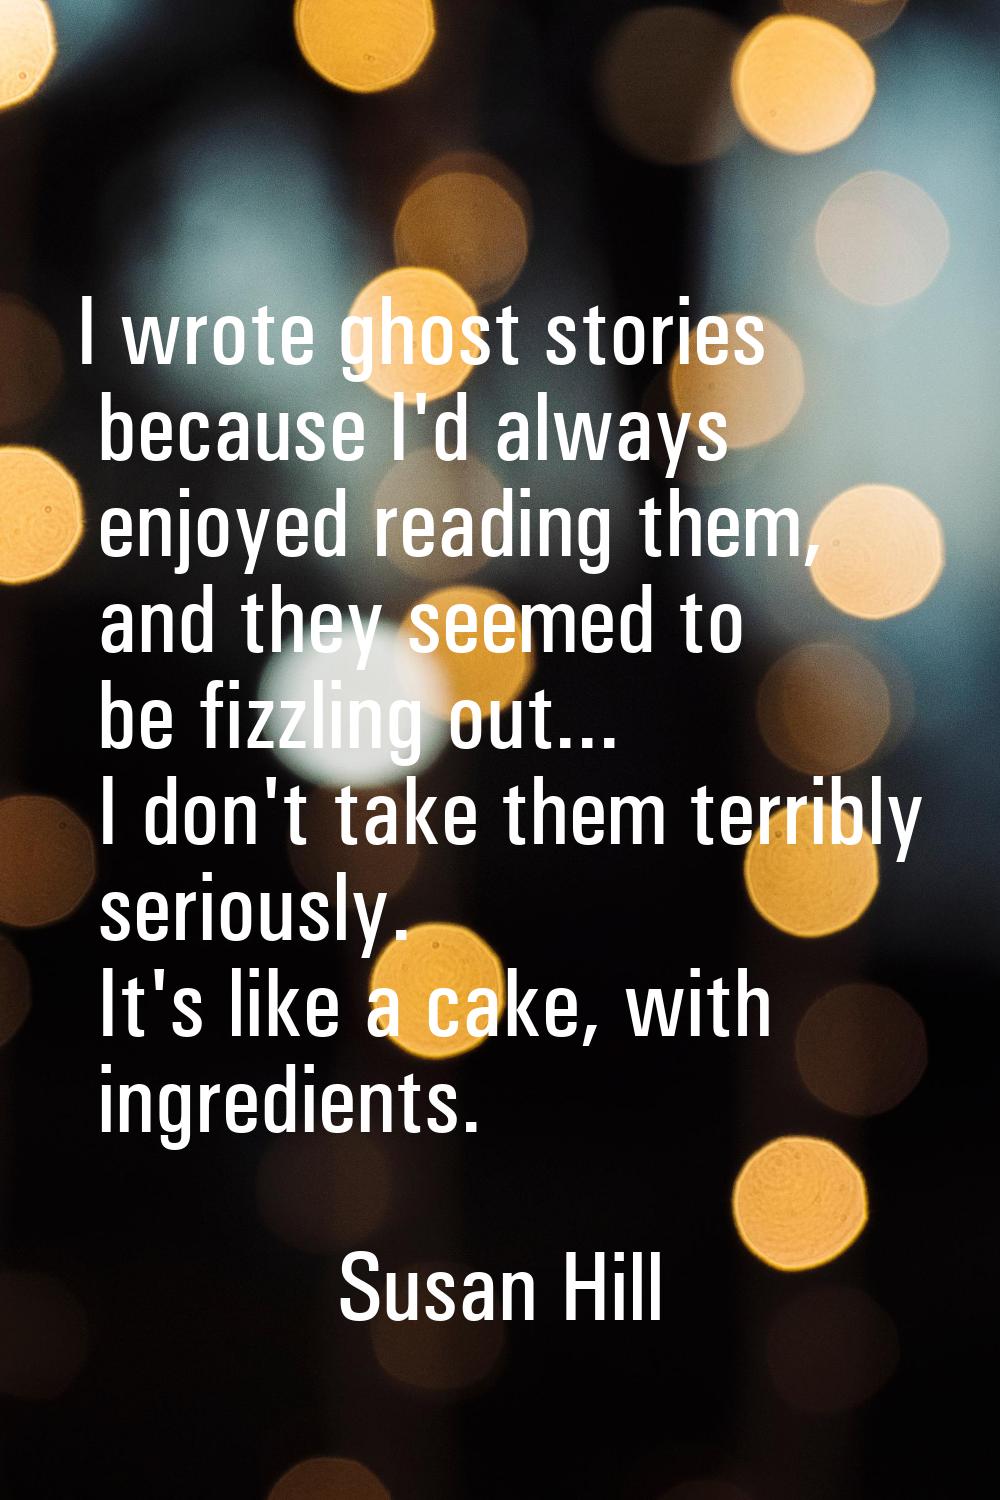 I wrote ghost stories because I'd always enjoyed reading them, and they seemed to be fizzling out..